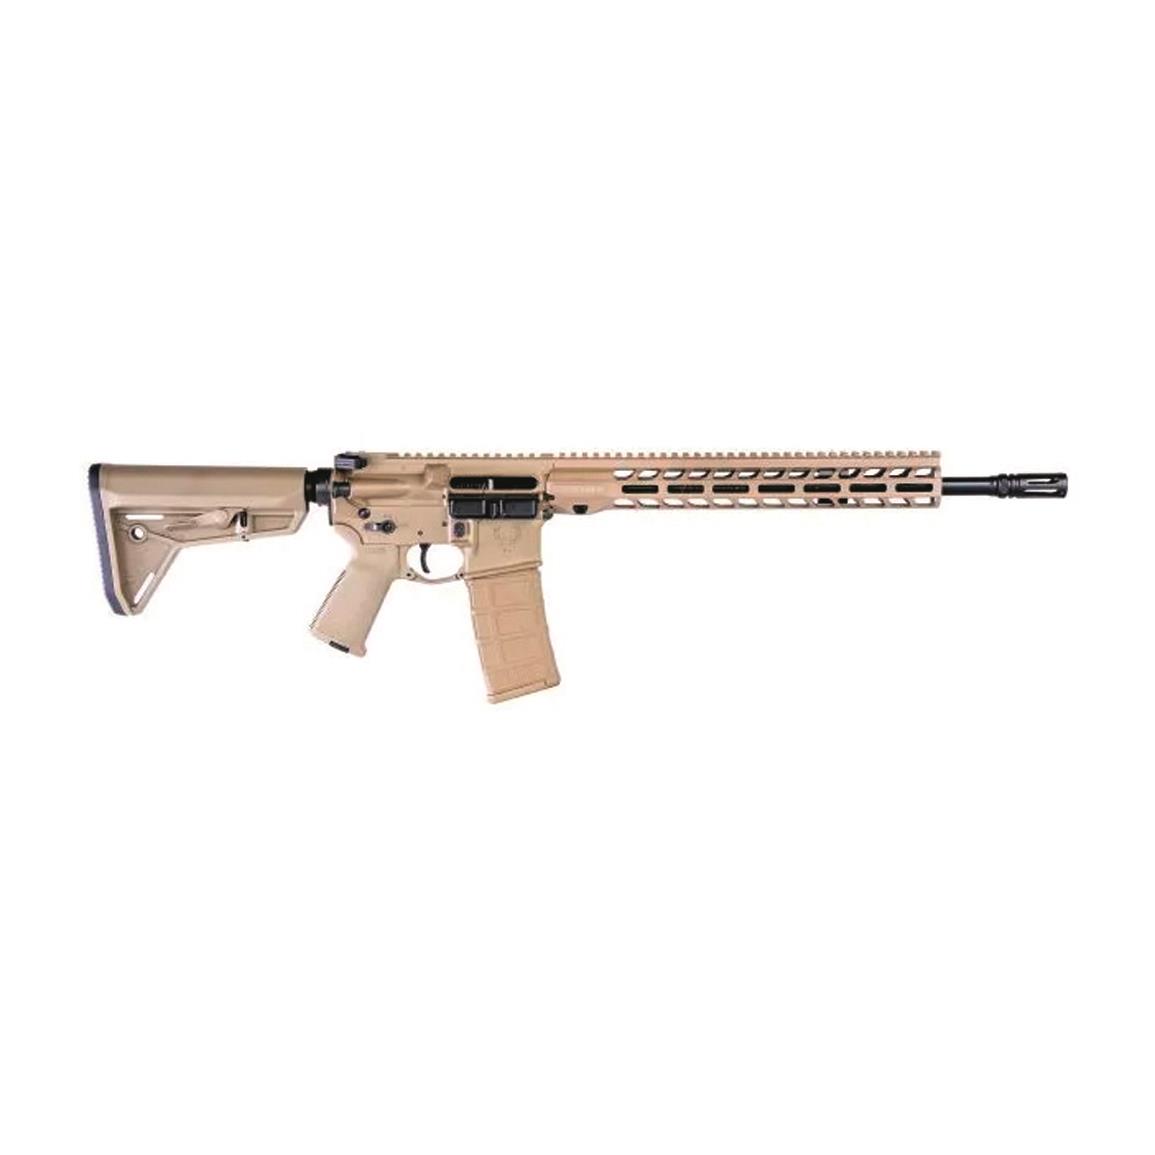 Stag Arms Stag-15 Tactical AR-15, Semi-automatic, 5.56 NATO/.223 Rem., 16" Barrel, FDE, 30+1 Rds.